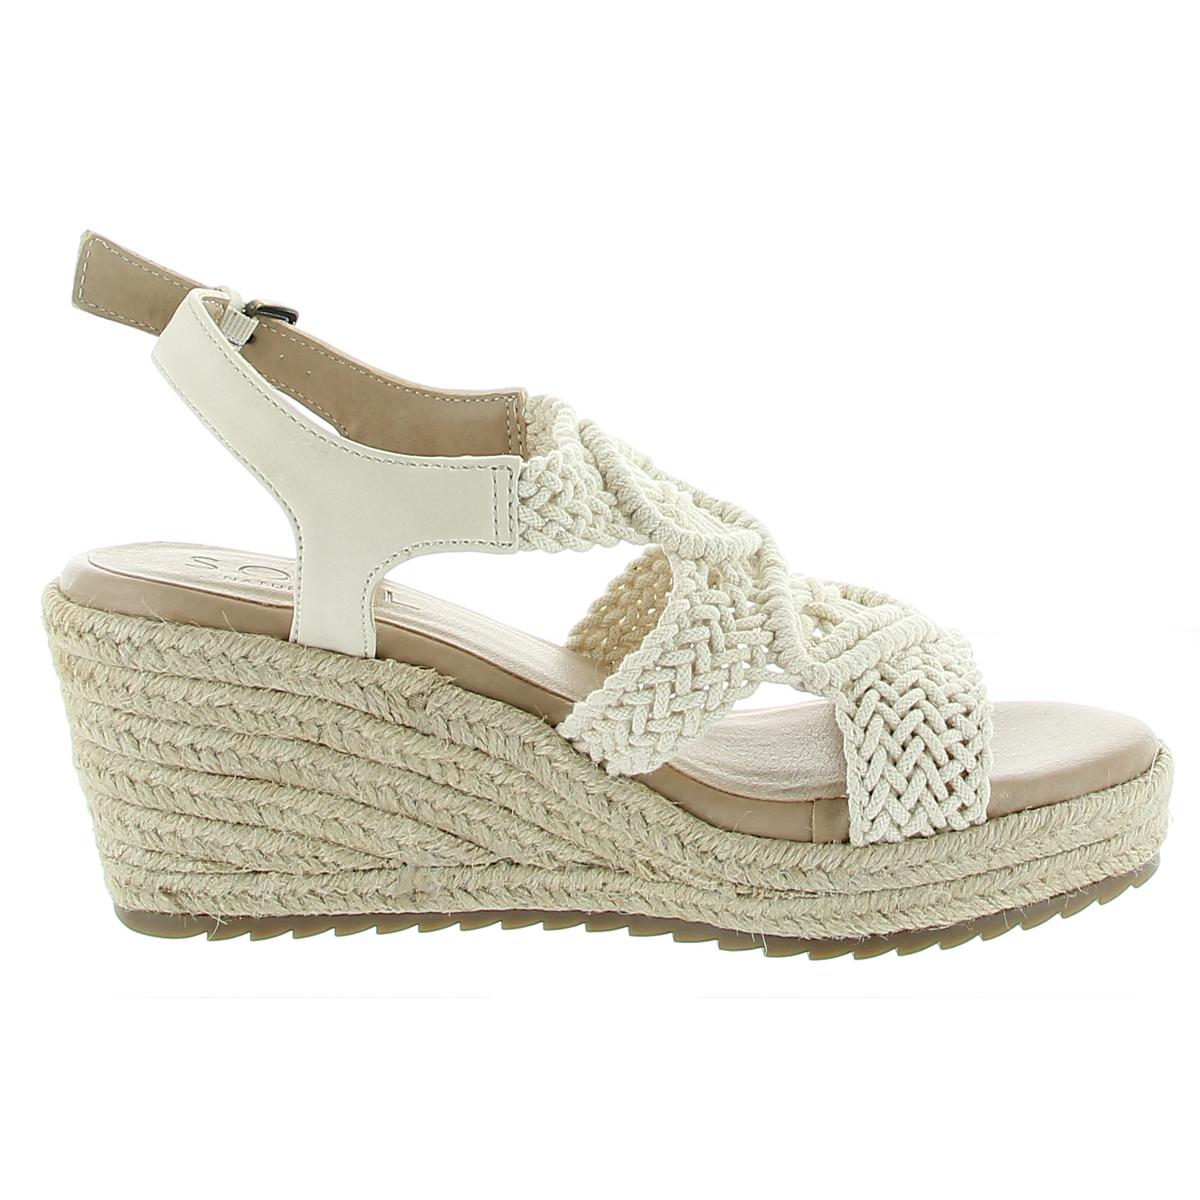 SOUL Naturalizer Womens Oasis Macrame Espadrille Wedge Sandals Shoes ...